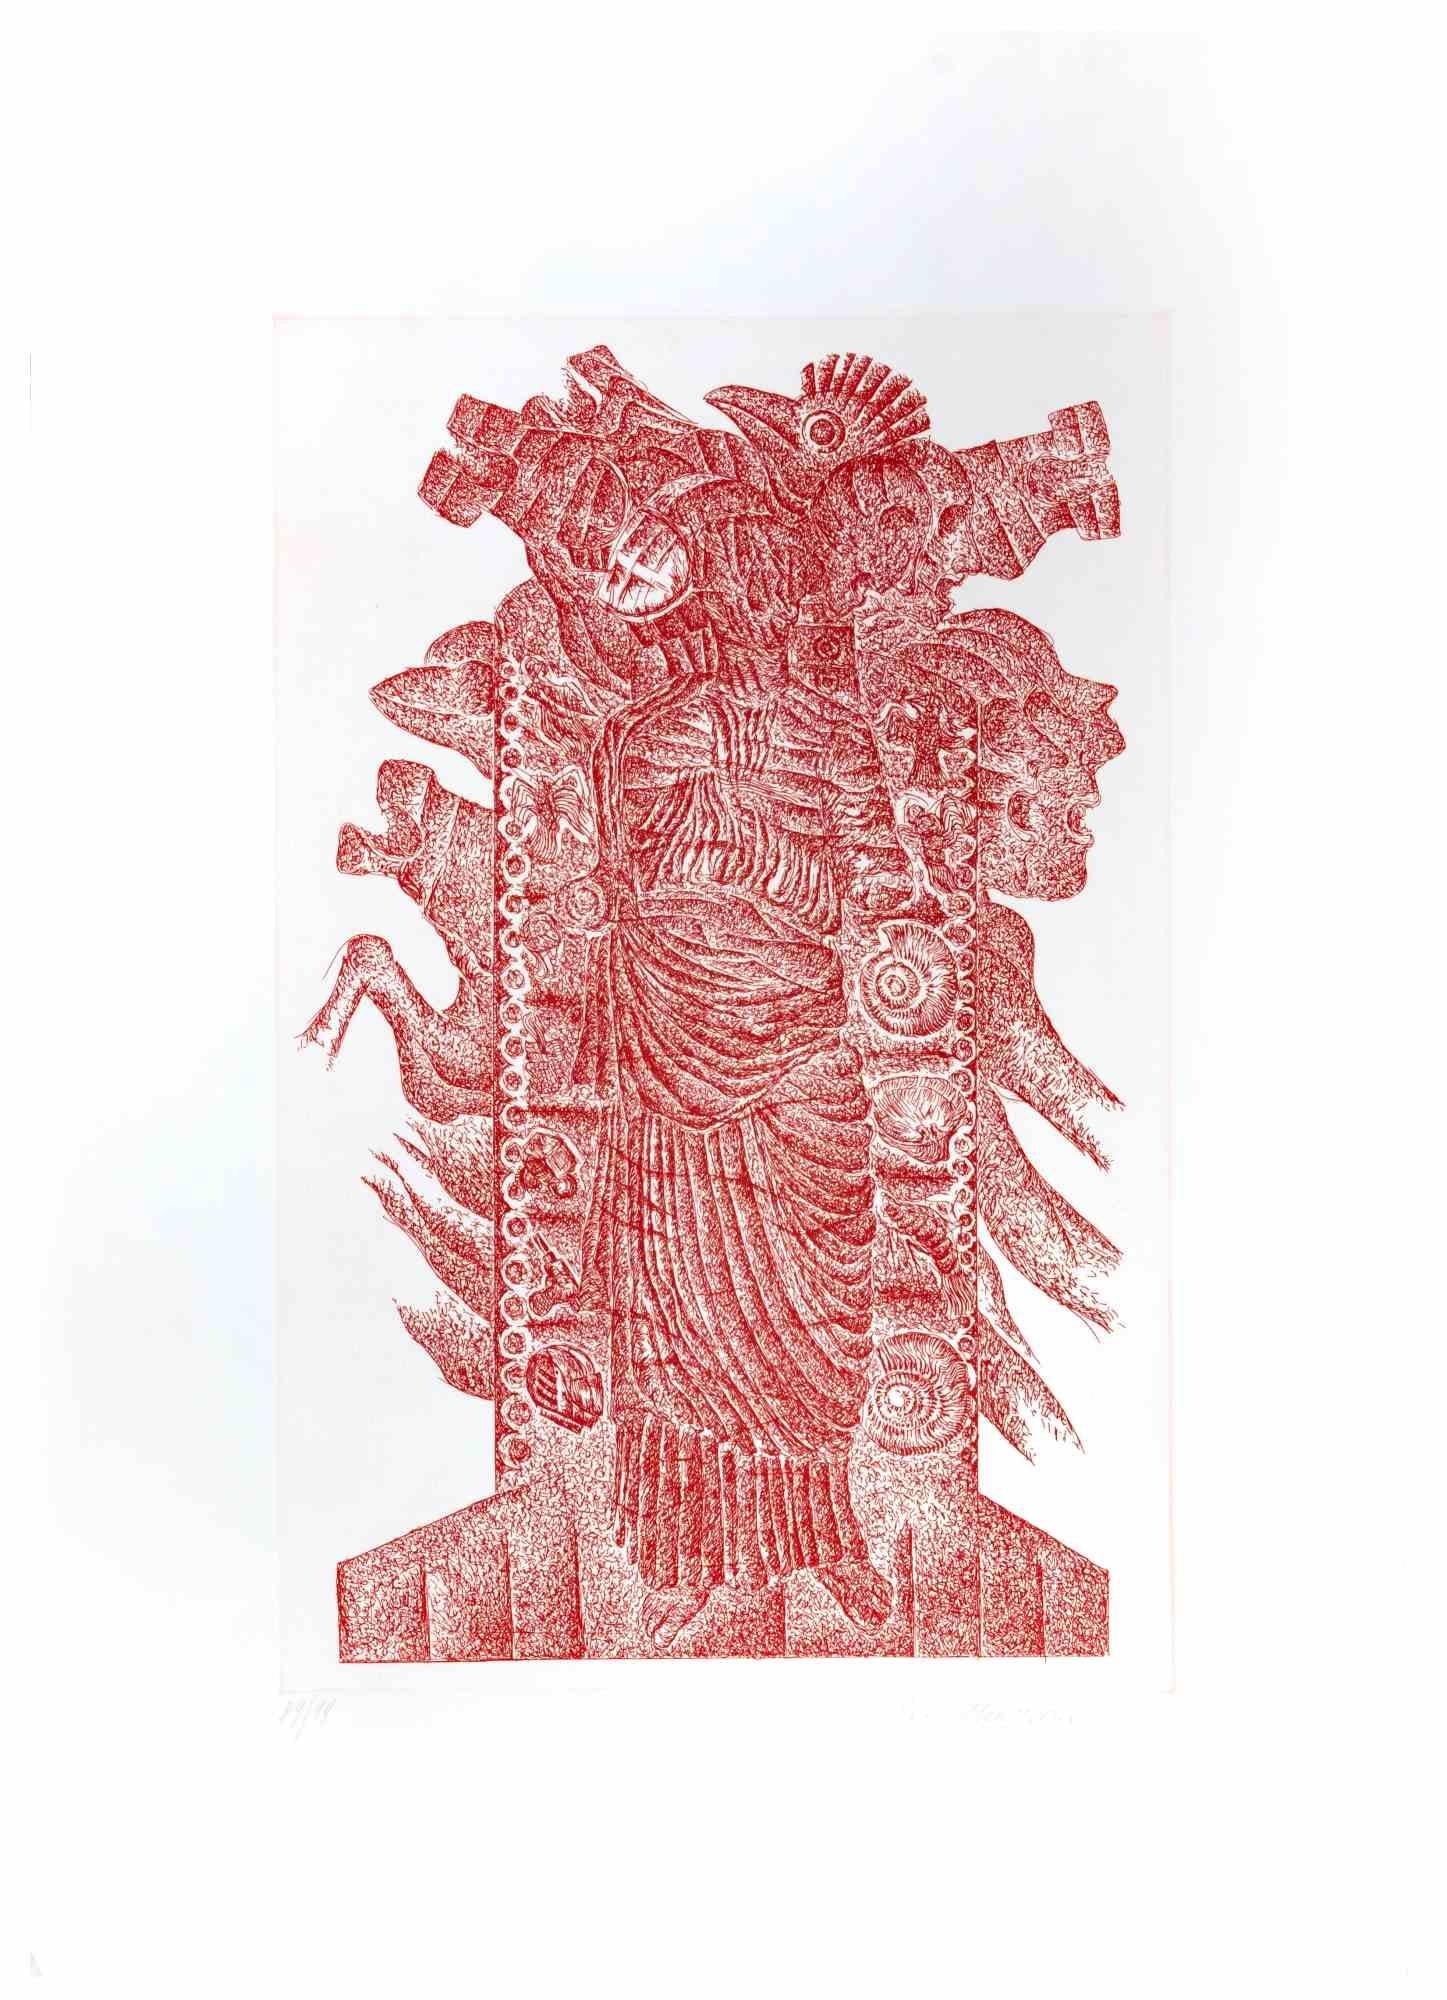 Totem is an original red-ink etching on paper realized by the Italian artist Elio Mazzella (b. Naples, 1938).

Hand-signed in pencil by the artist on the lower right margin.

Numbered in pencil on the lower left margin. This is a fine specimen from